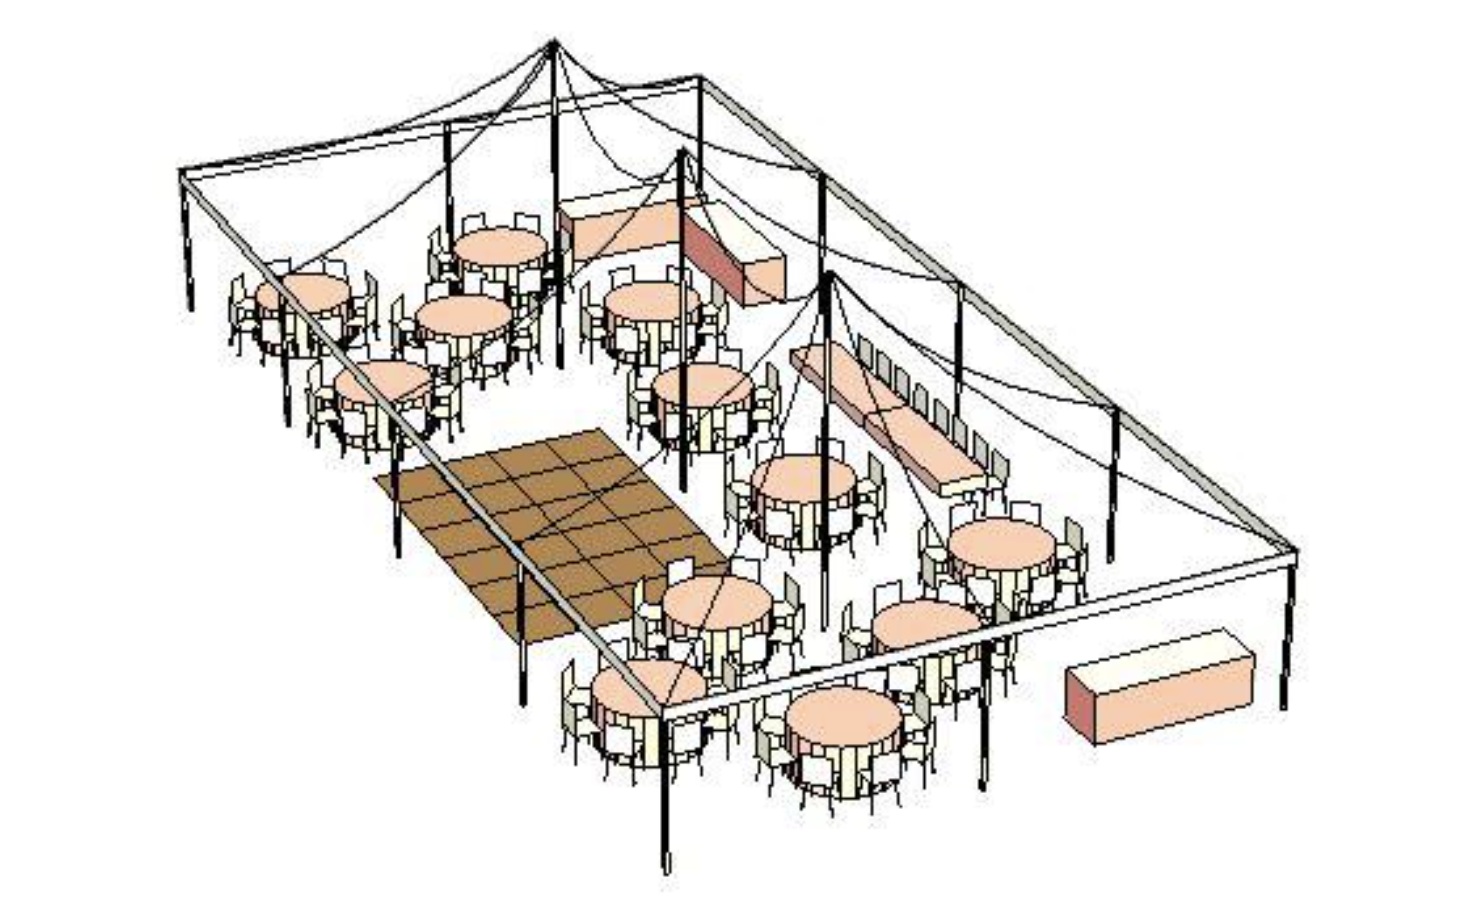 100 Guest Reception Seating - Big Tent Events